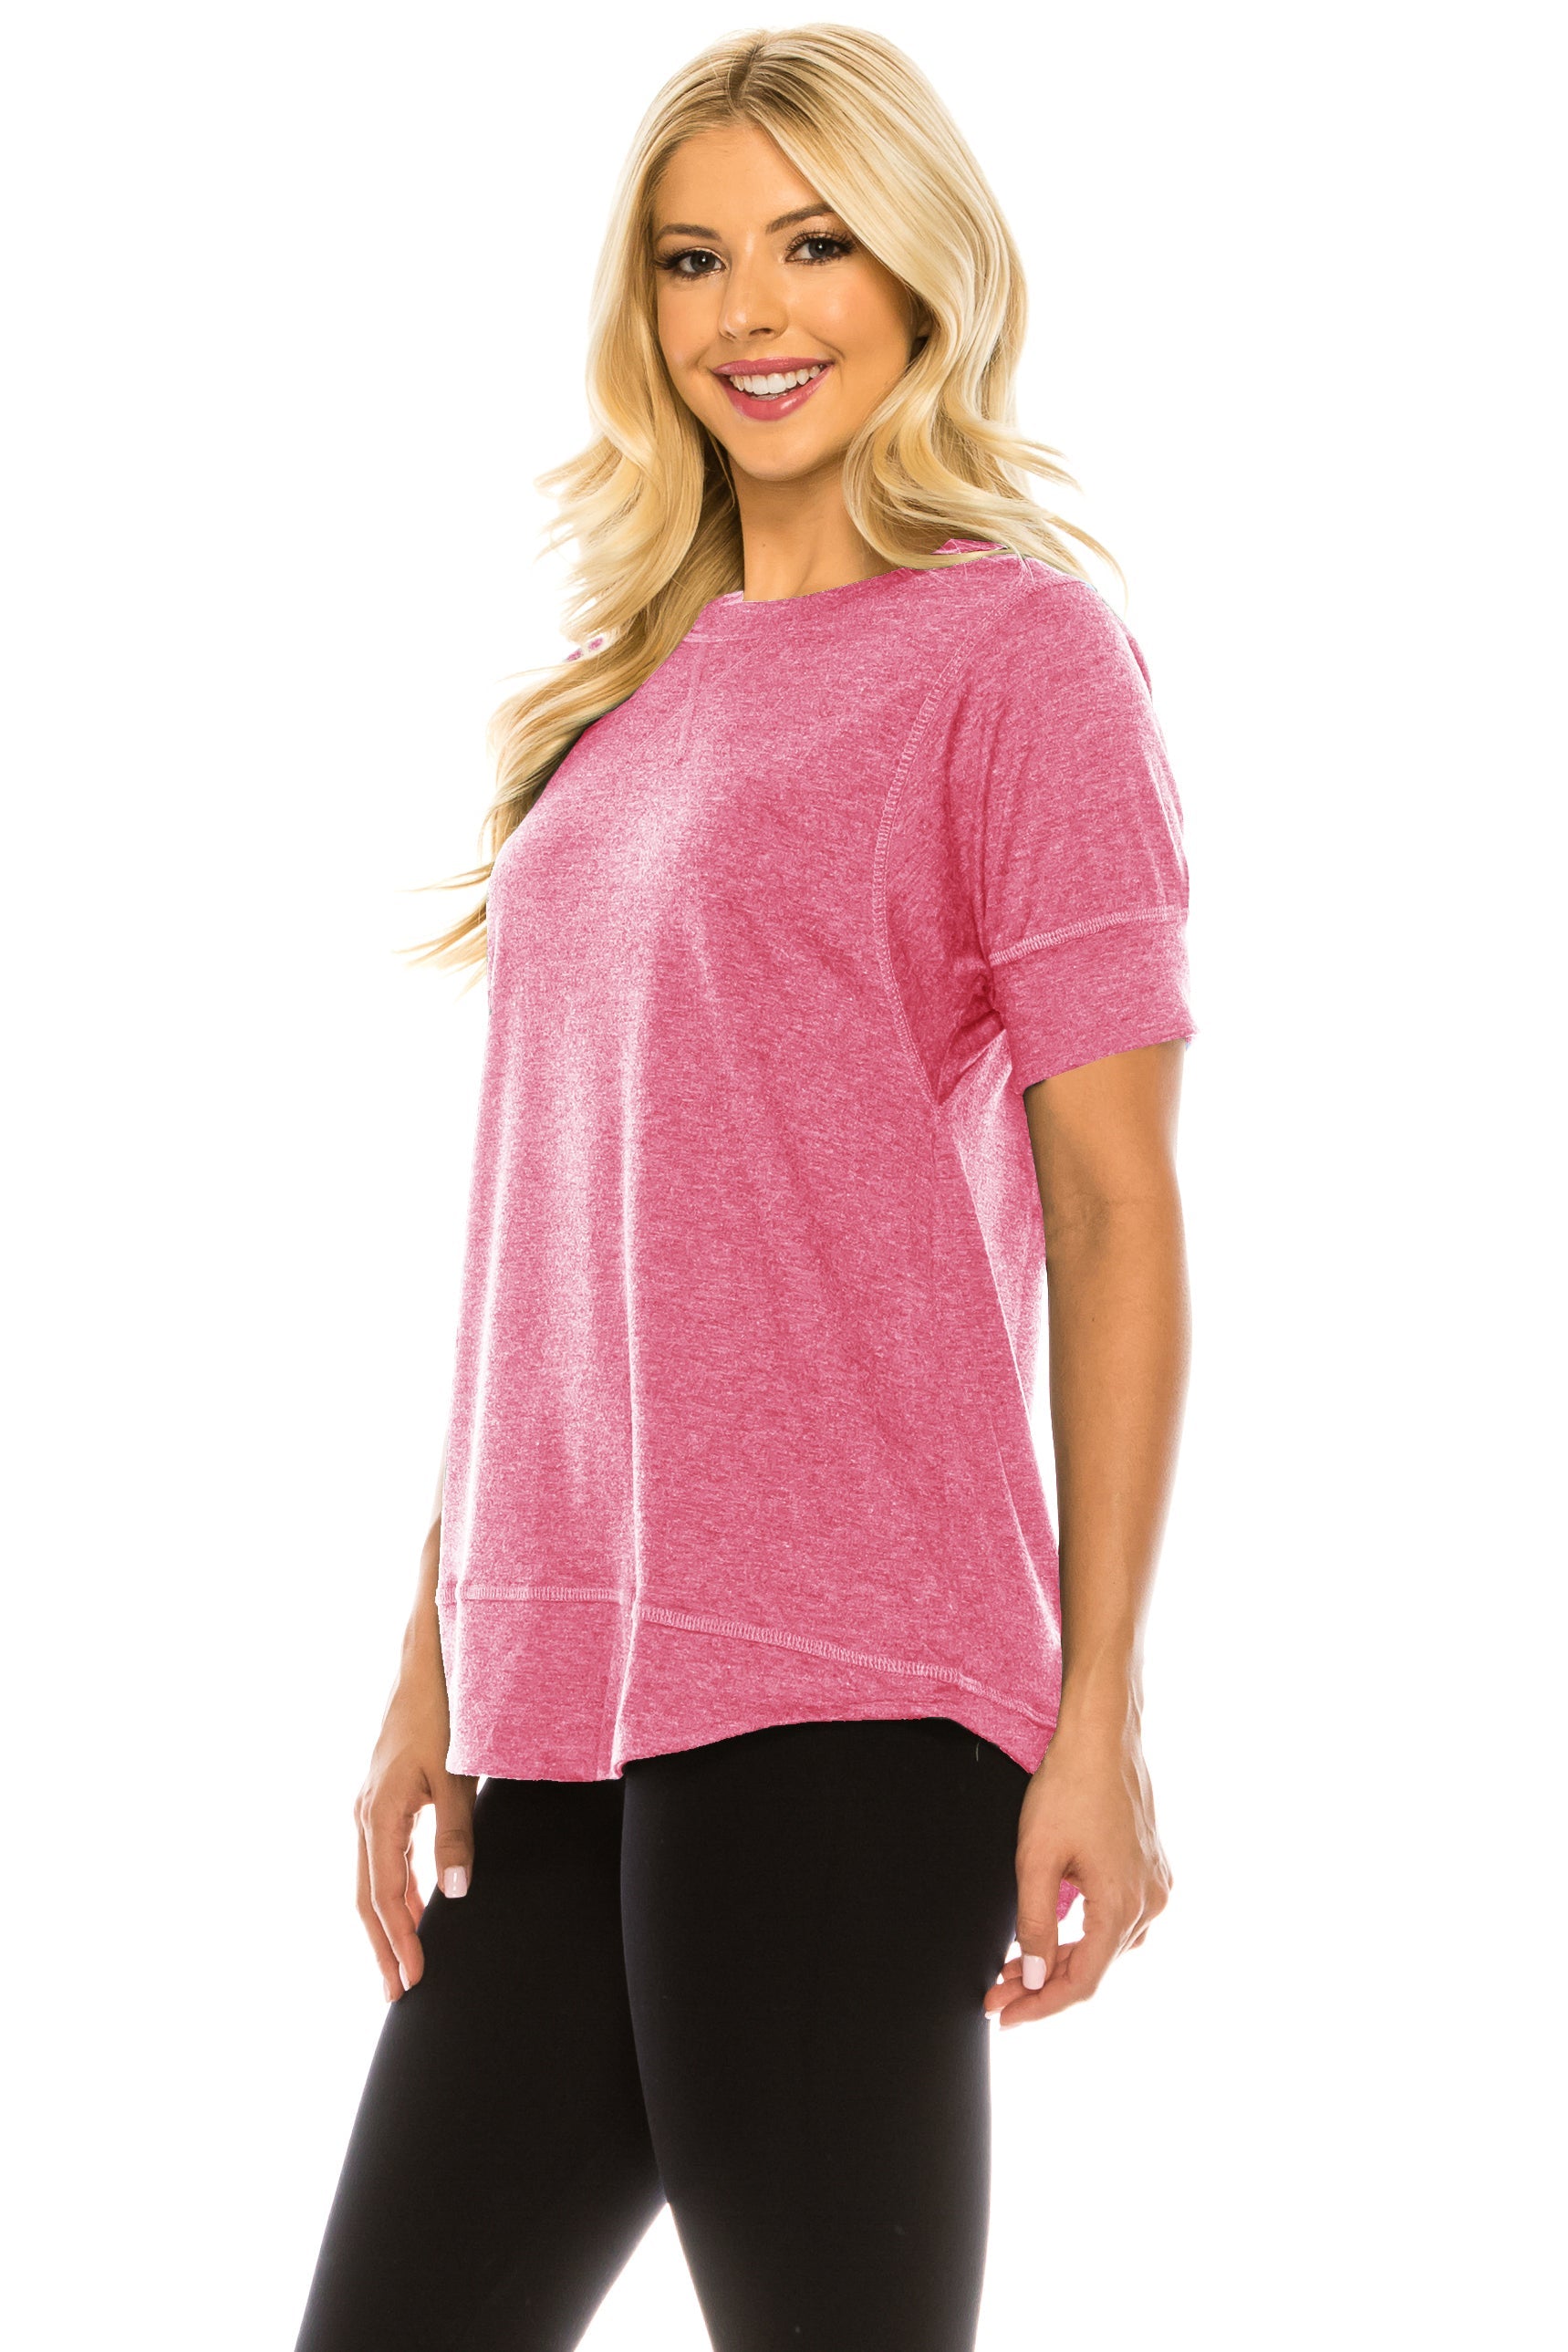 Haute Edition Casual Loose Fit Raglan Cross Stitch Comfy Tees. Plus Sizes Available DAILYHAUTE